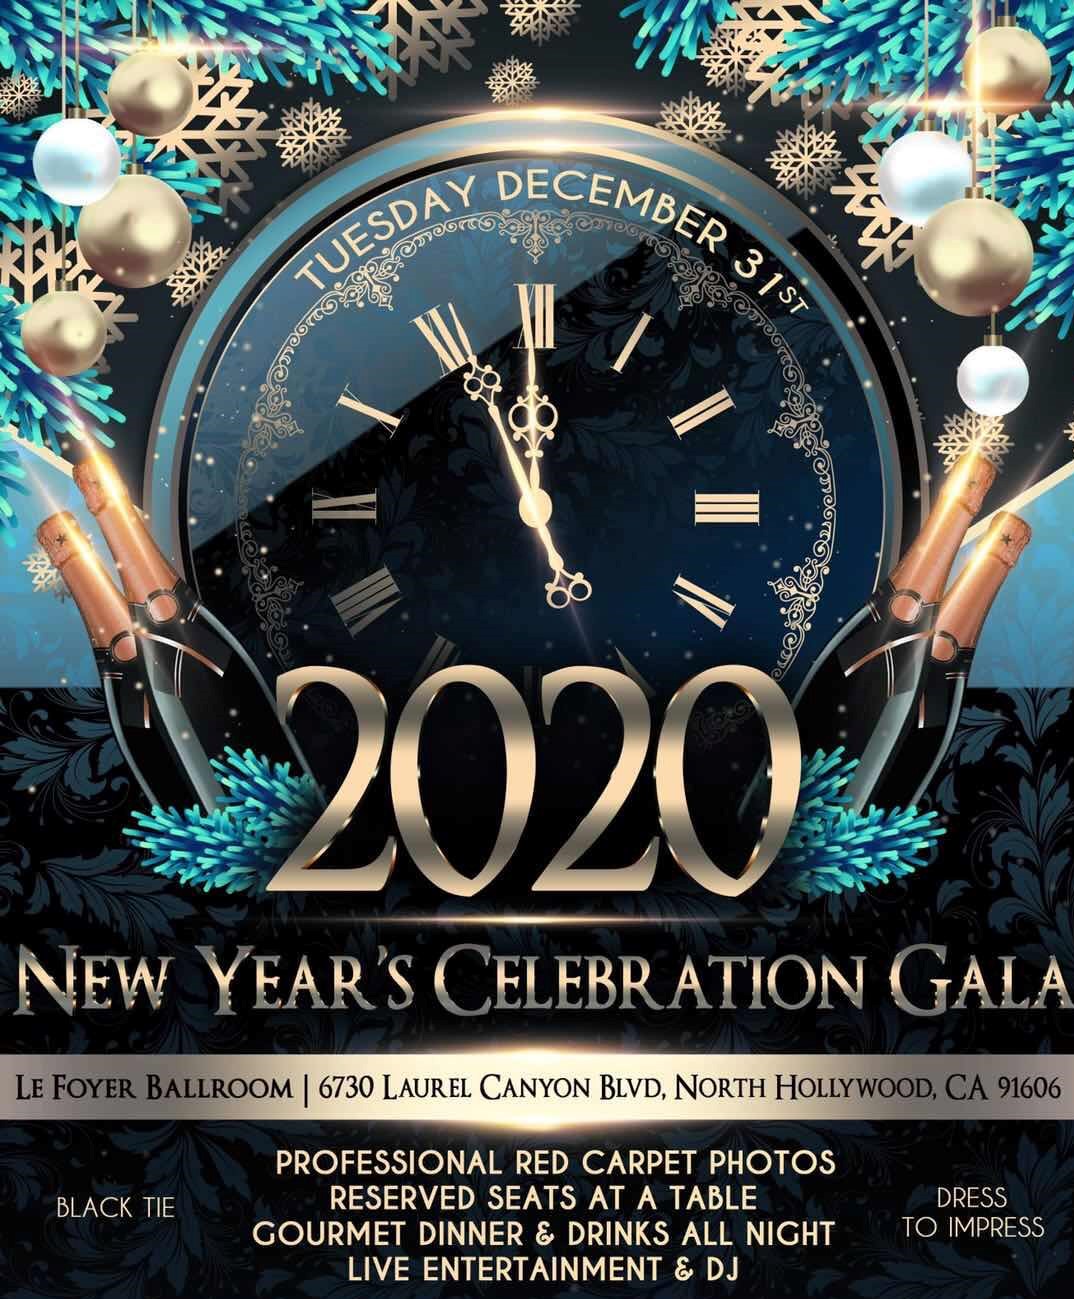 New Year 2020 Spectacular Celebration Gala in Los Angeles!